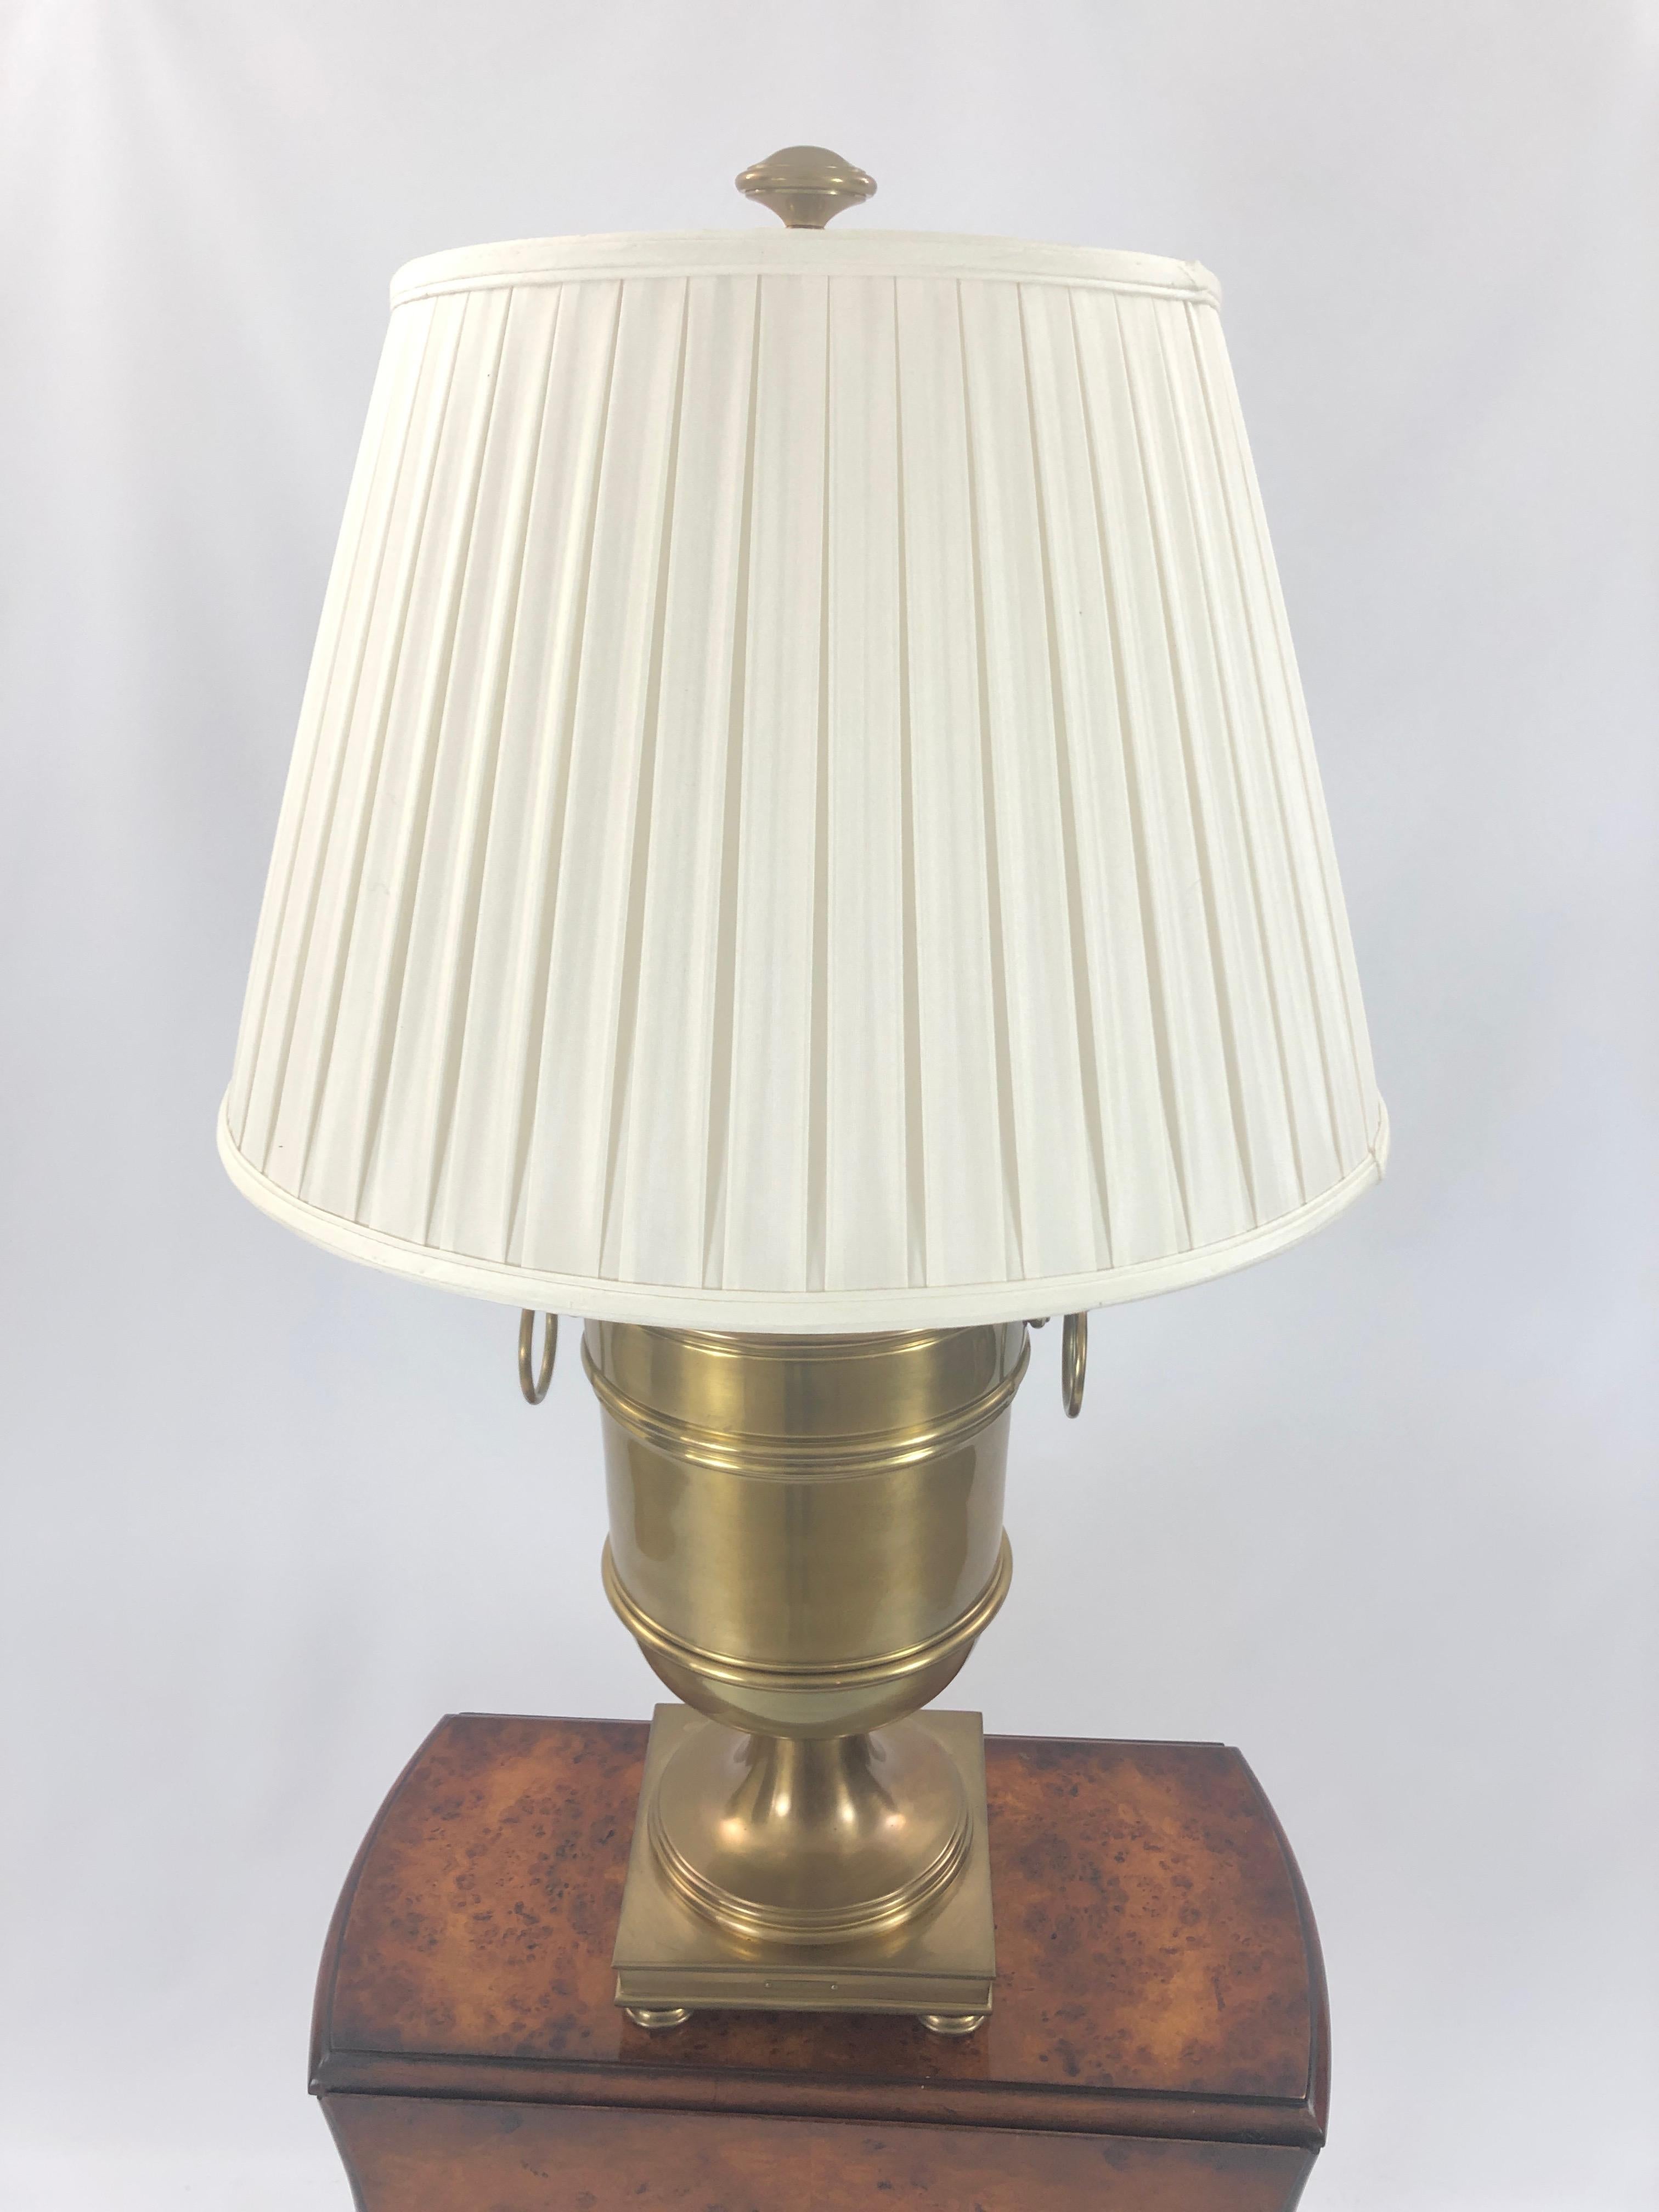 Fabulous impressively sized brass urn lamp with decorative rings on the sides and square bases on feet, beautifully made by Ralph Lauren with label on the front.
Custom pleated shade and handsome meaty finial on top.
Measures: Urn is 11 w 35 H 9